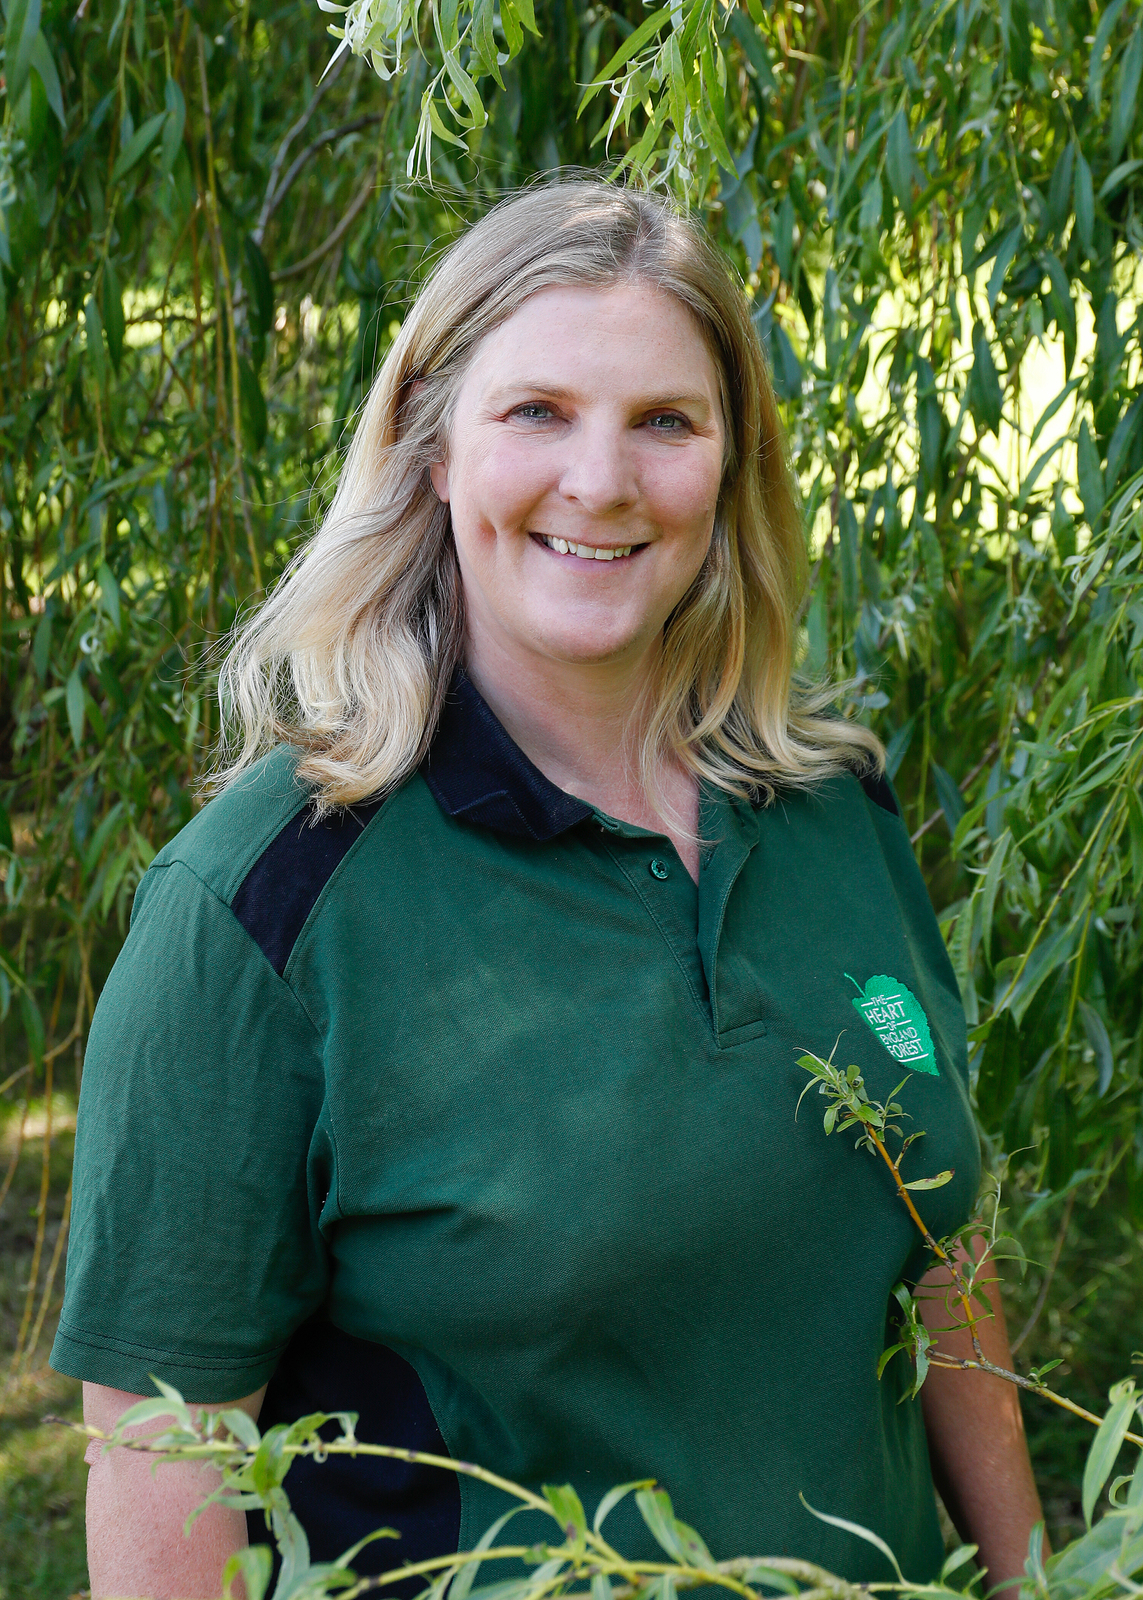 Close up of Elaine, our Head of Learning and Skills, stood smiling, surrounded by green leaves and wearing a branded, green Heart of England polo shirt.